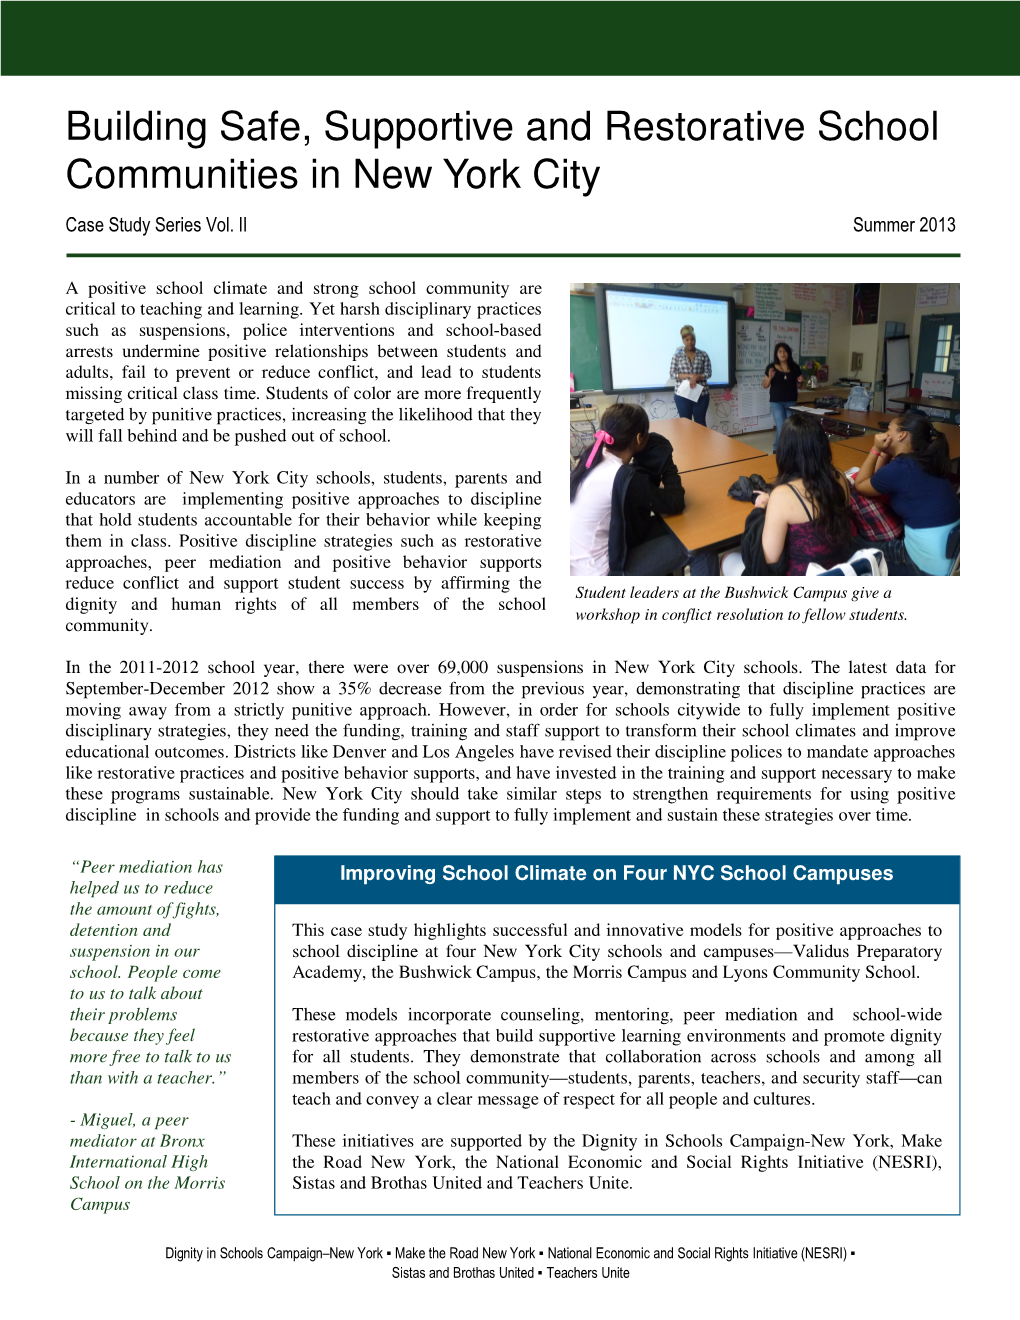 Building Safe, Supportive and Restorative School Communities in New York City Case Study Series Vol